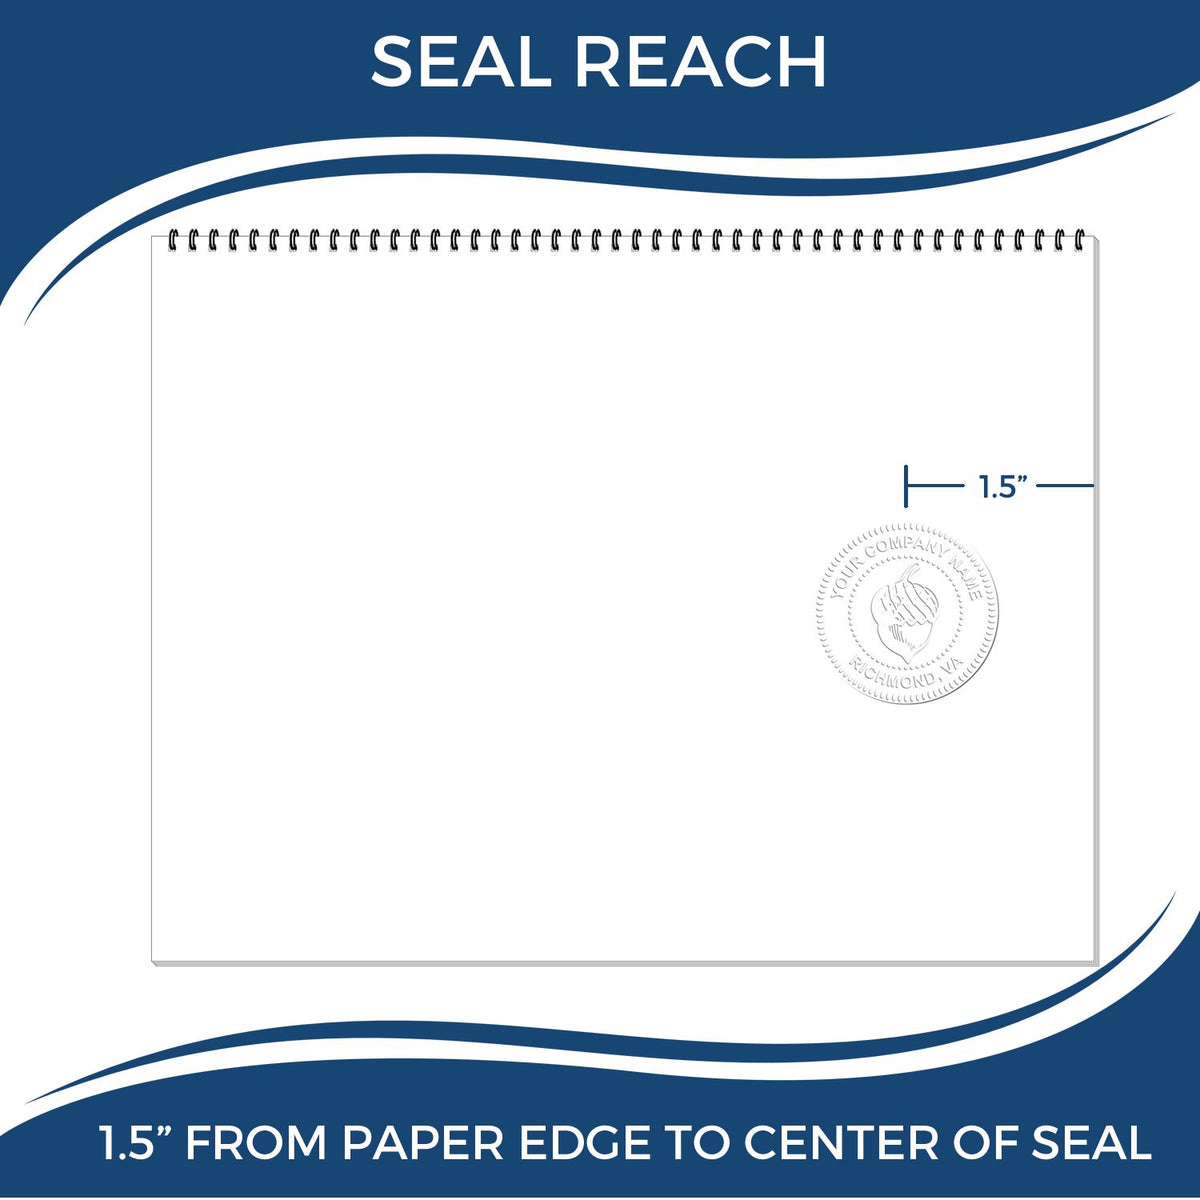 An infographic showing the seal reach which is represented by a ruler and a miniature seal image of the Hybrid Rhode Island Landscape Architect Seal